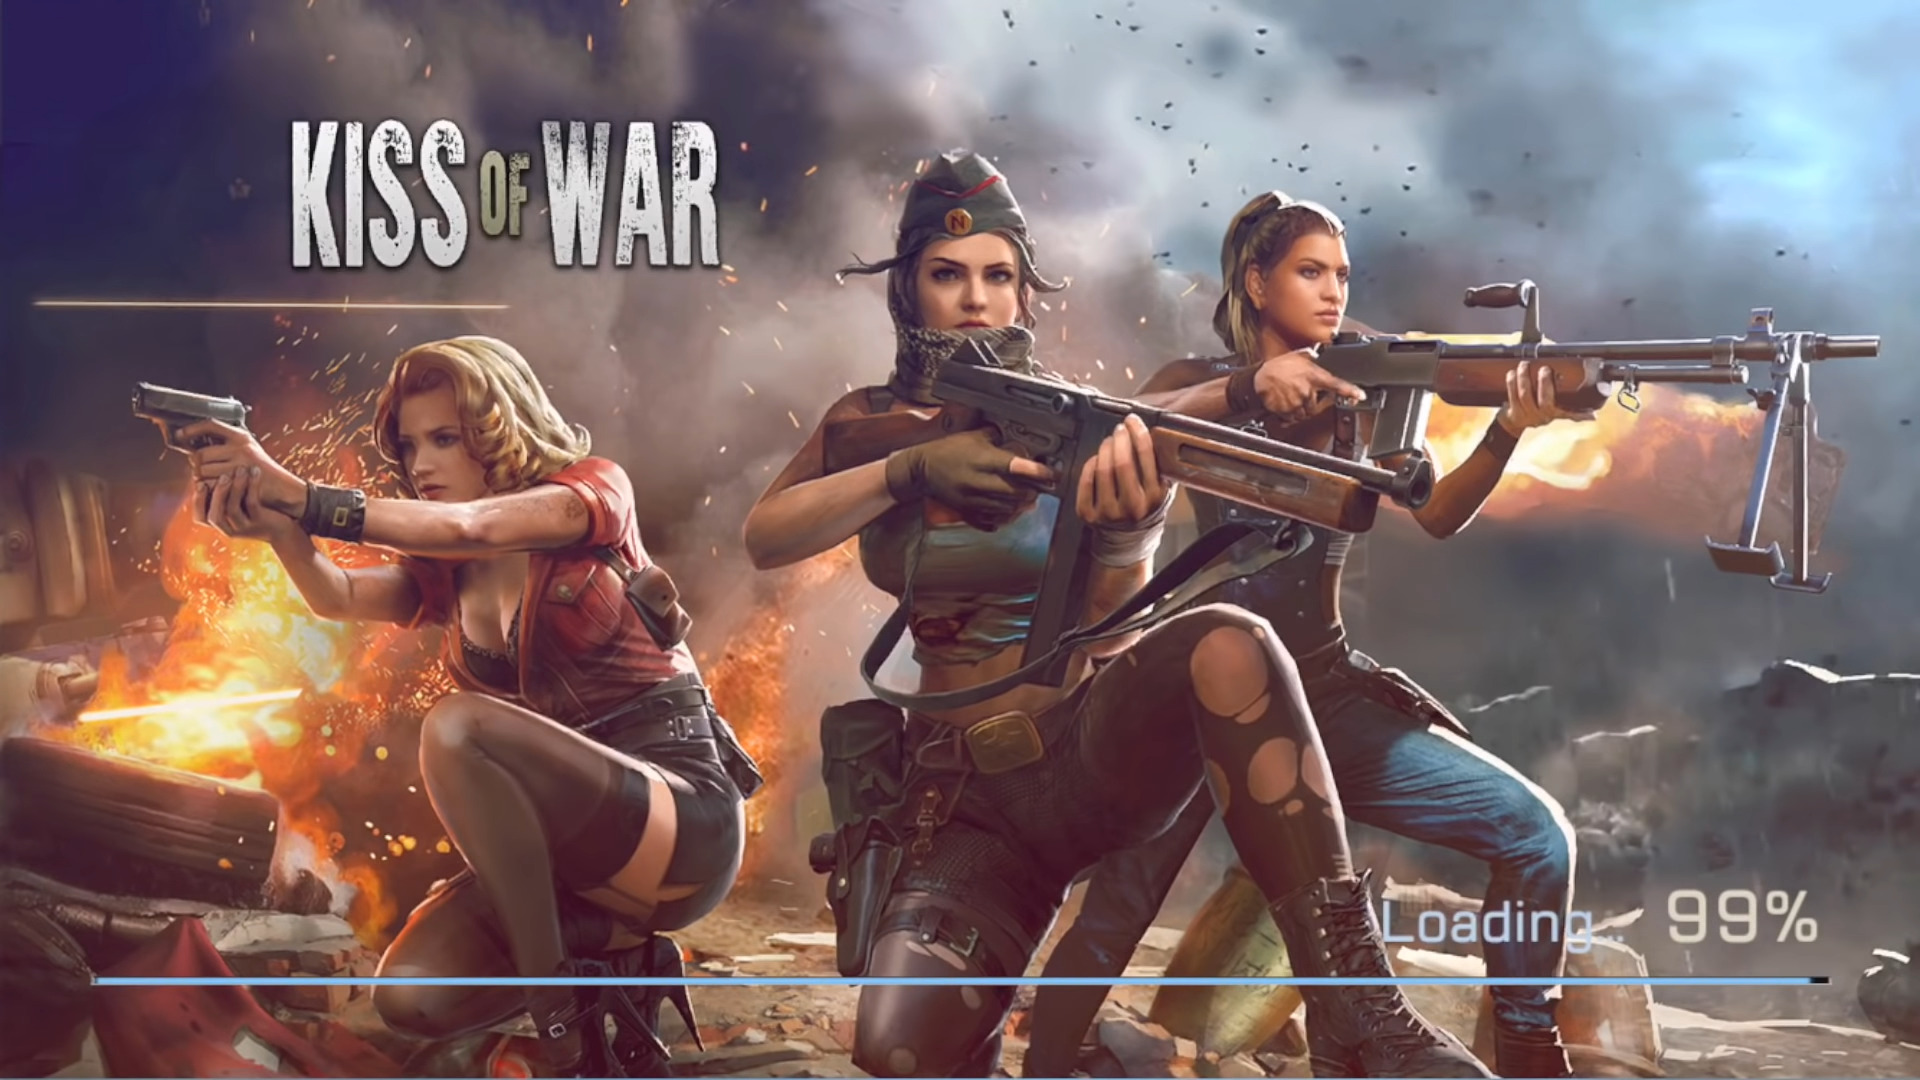 Download Kiss of War Android free game.